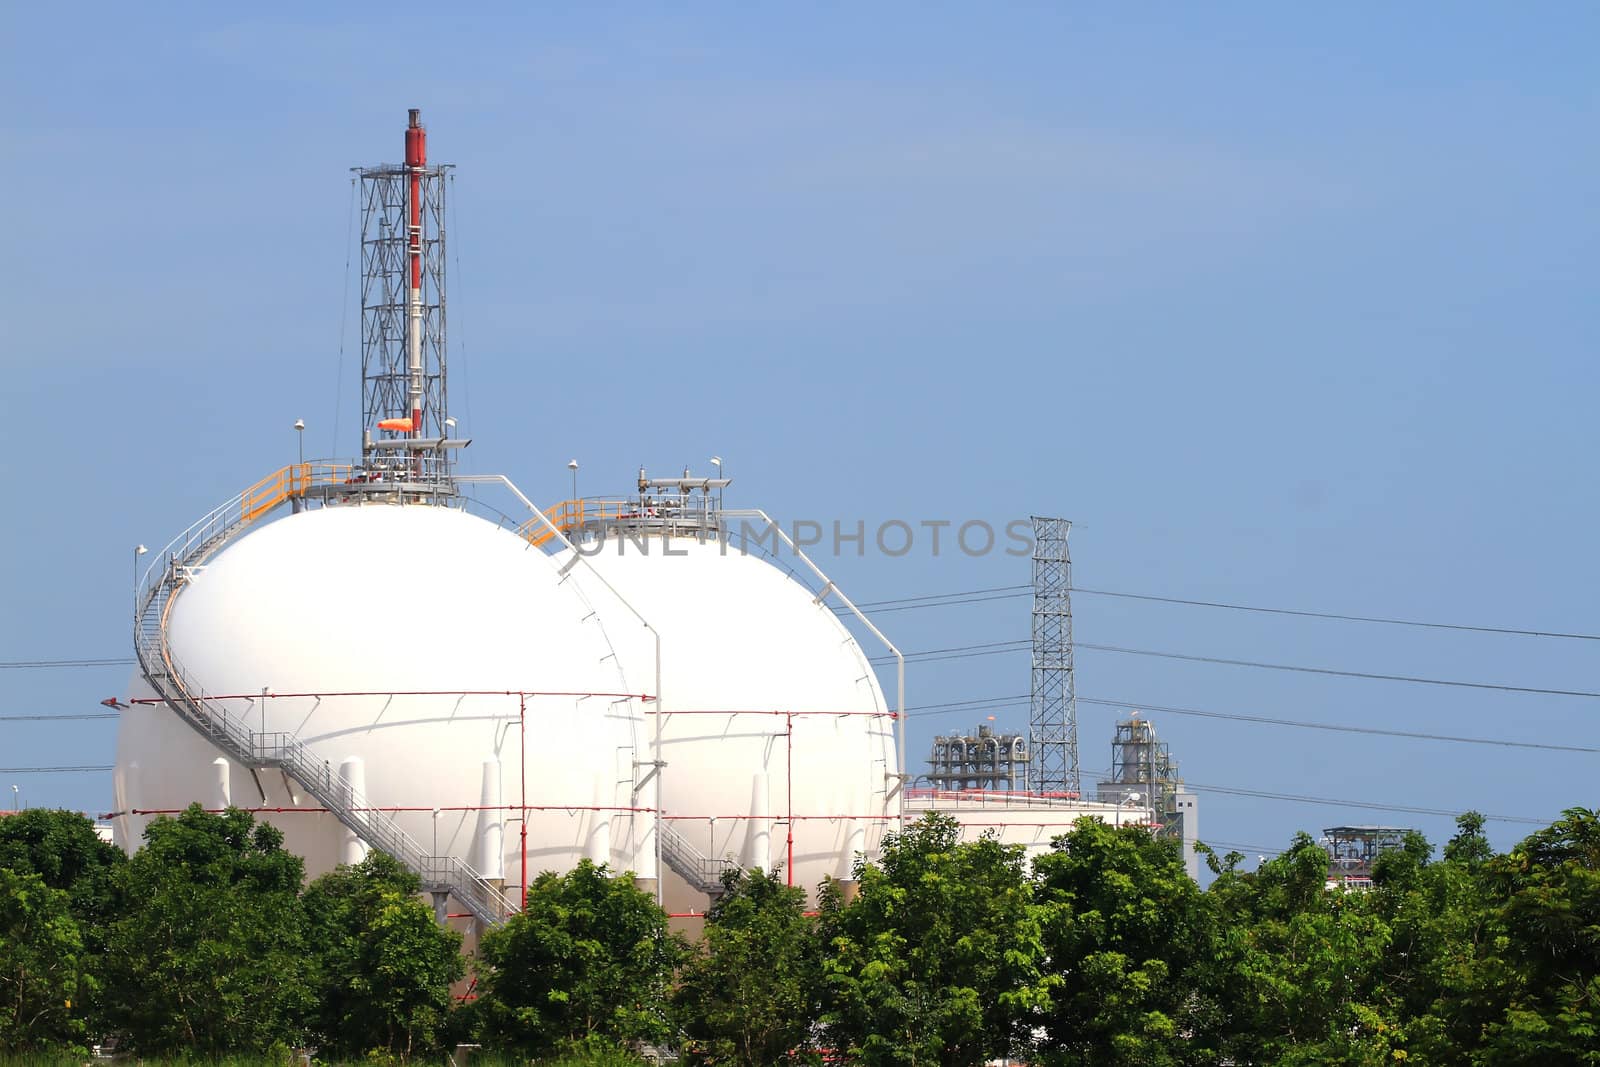 Oil refinery tanks photo by rufous